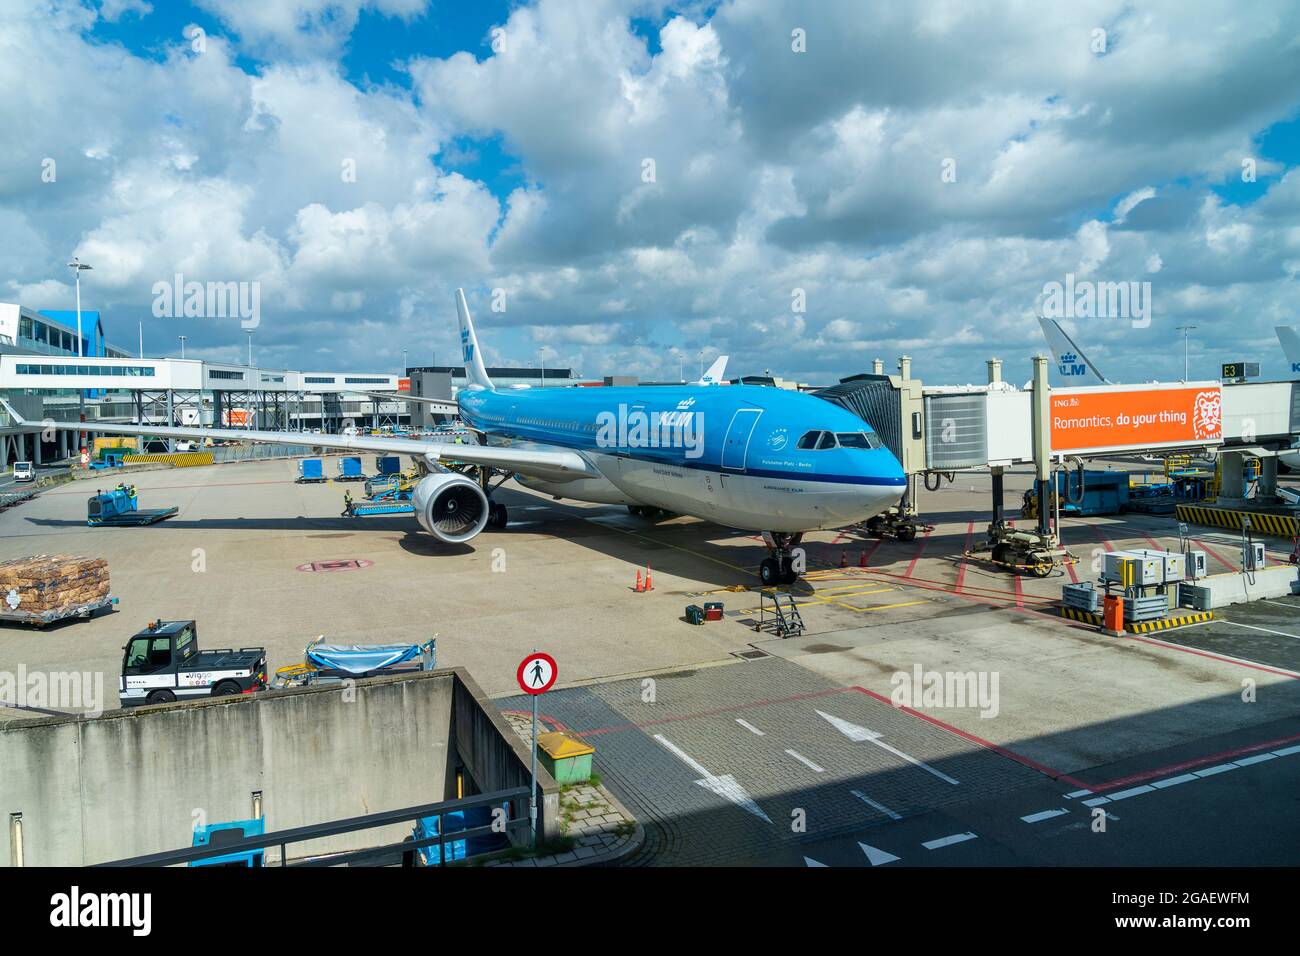 Amsterdam, the Netherlands - July 29, 2021: Aircraft by KLM Royal Dutch Airlines seen at Shiphol airport. Fully vaccinated travelers are allowed to travel during pandemic but required to wear masks at airports and while on aircrafts. Stock Photo